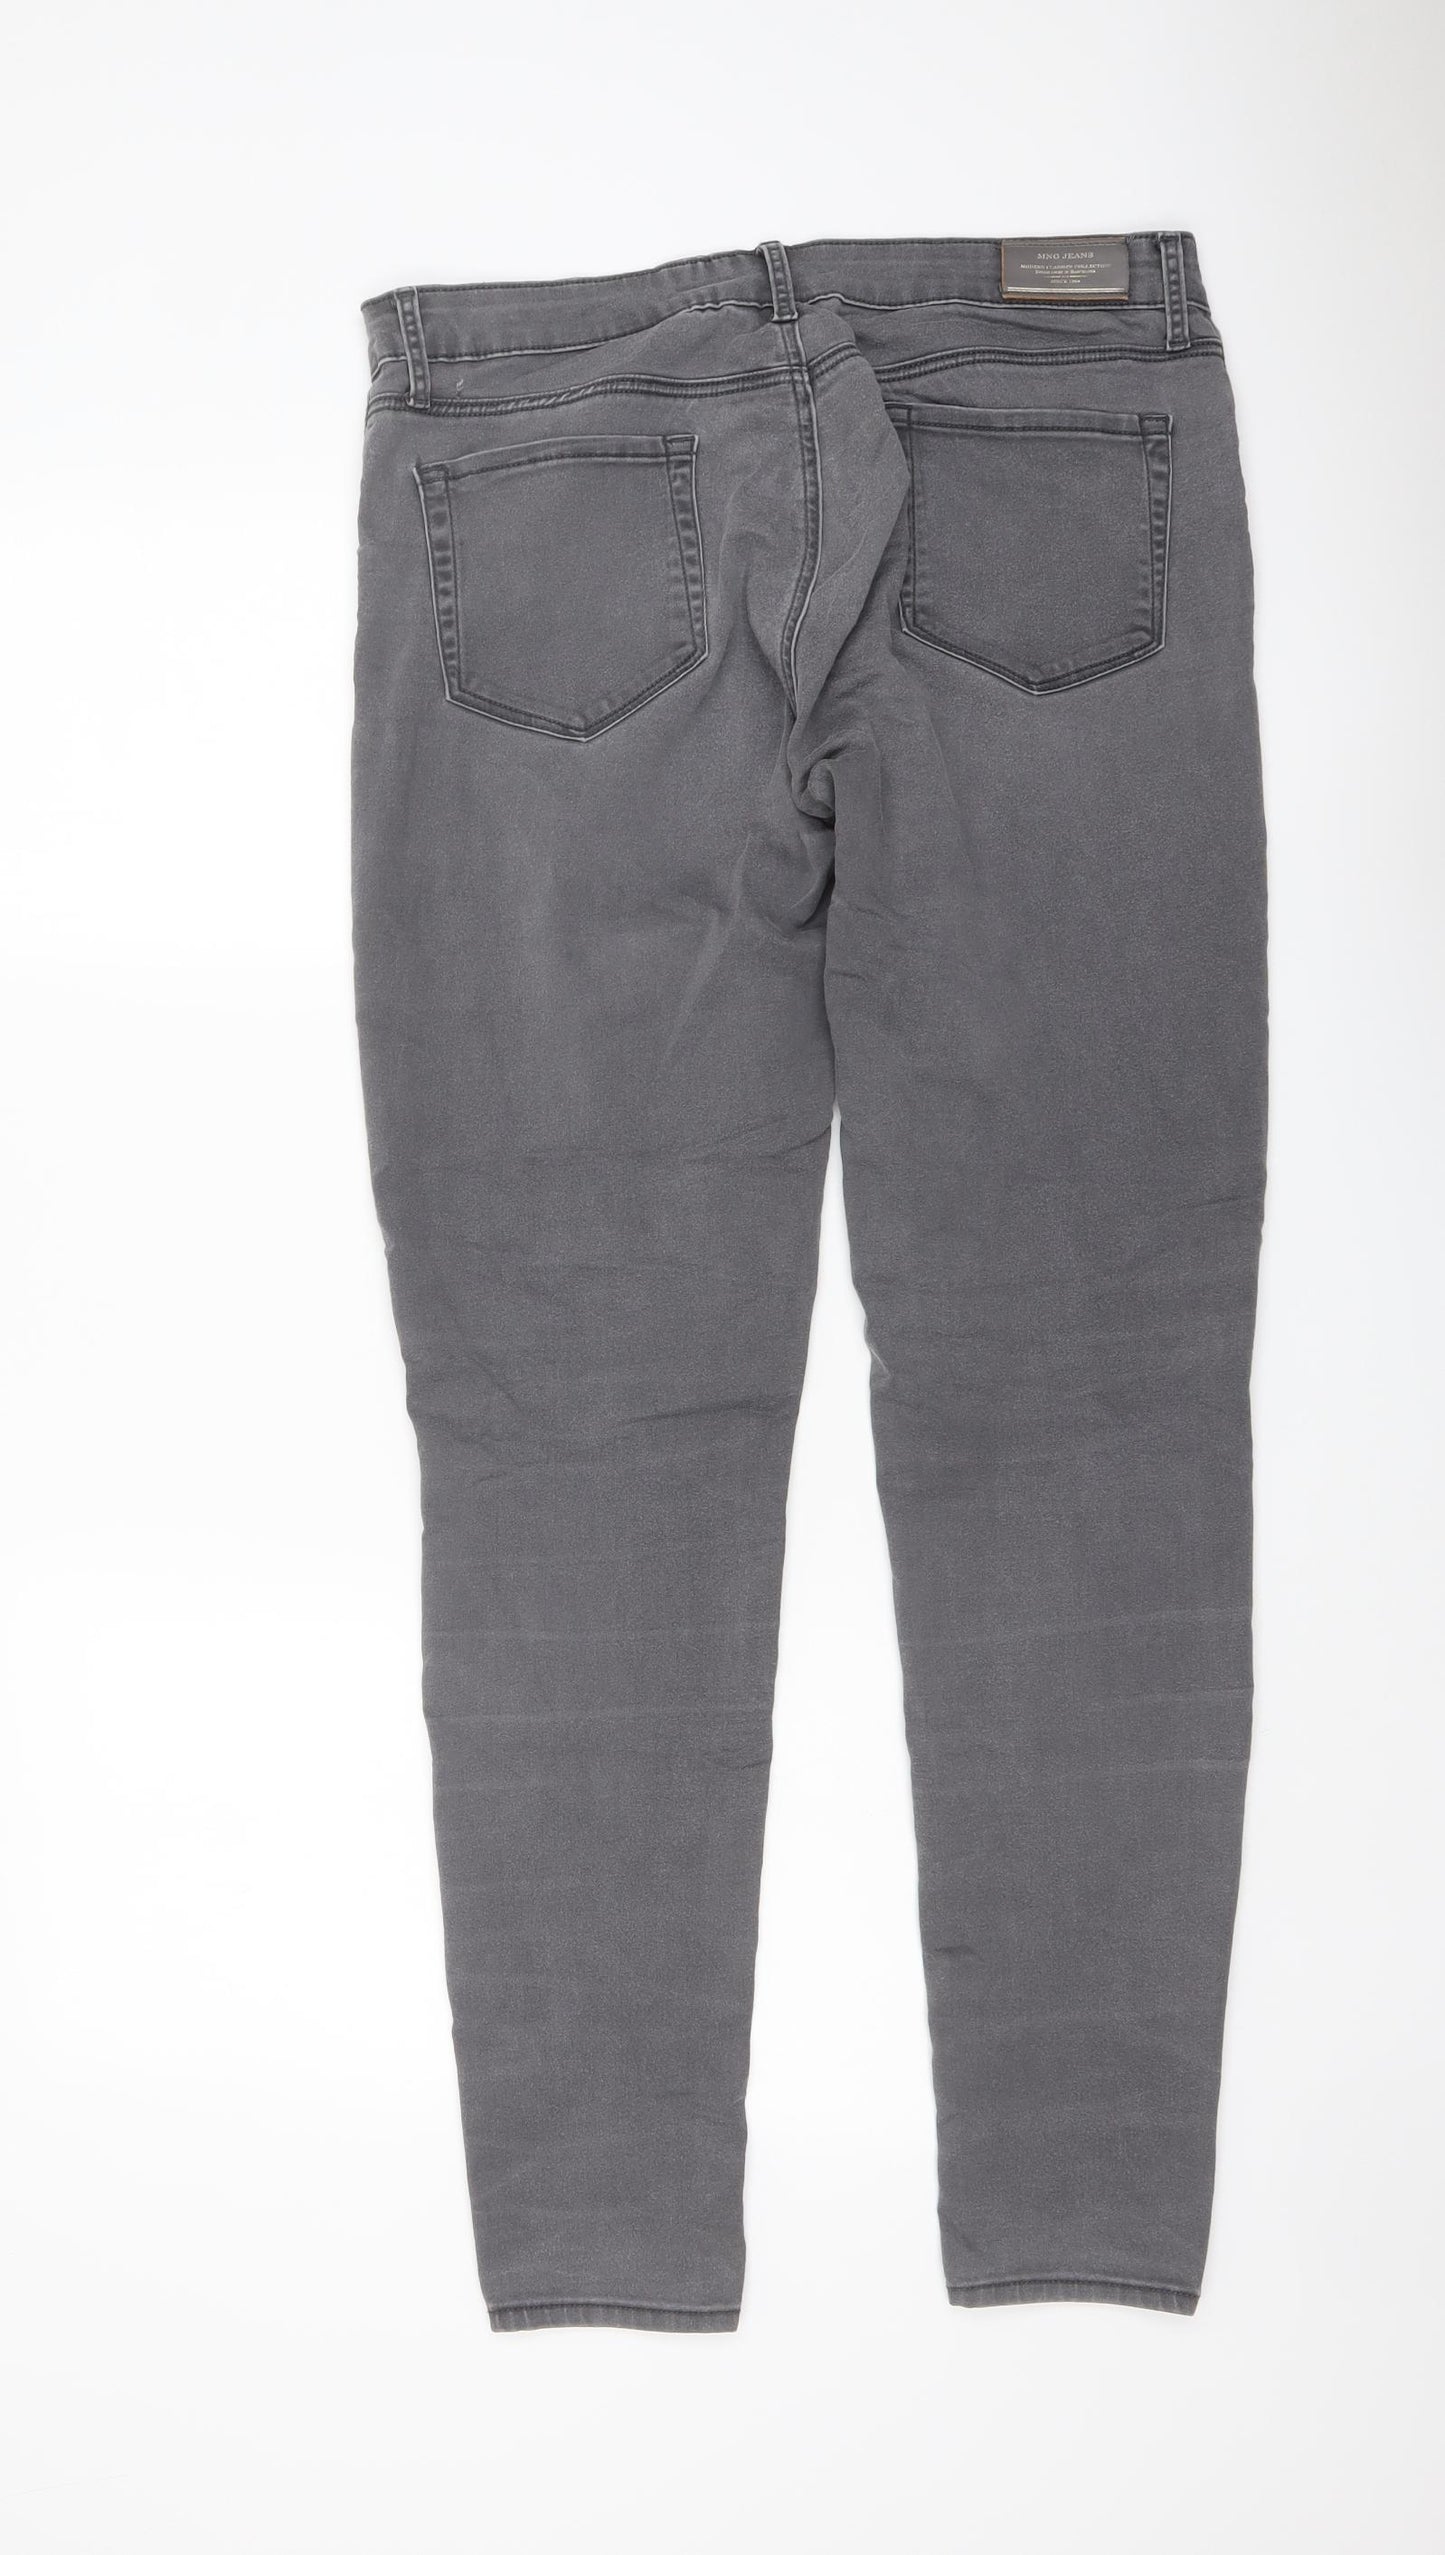 Mango Womens Grey Cotton Skinny Jeans Size 12 L31 in Regular Button